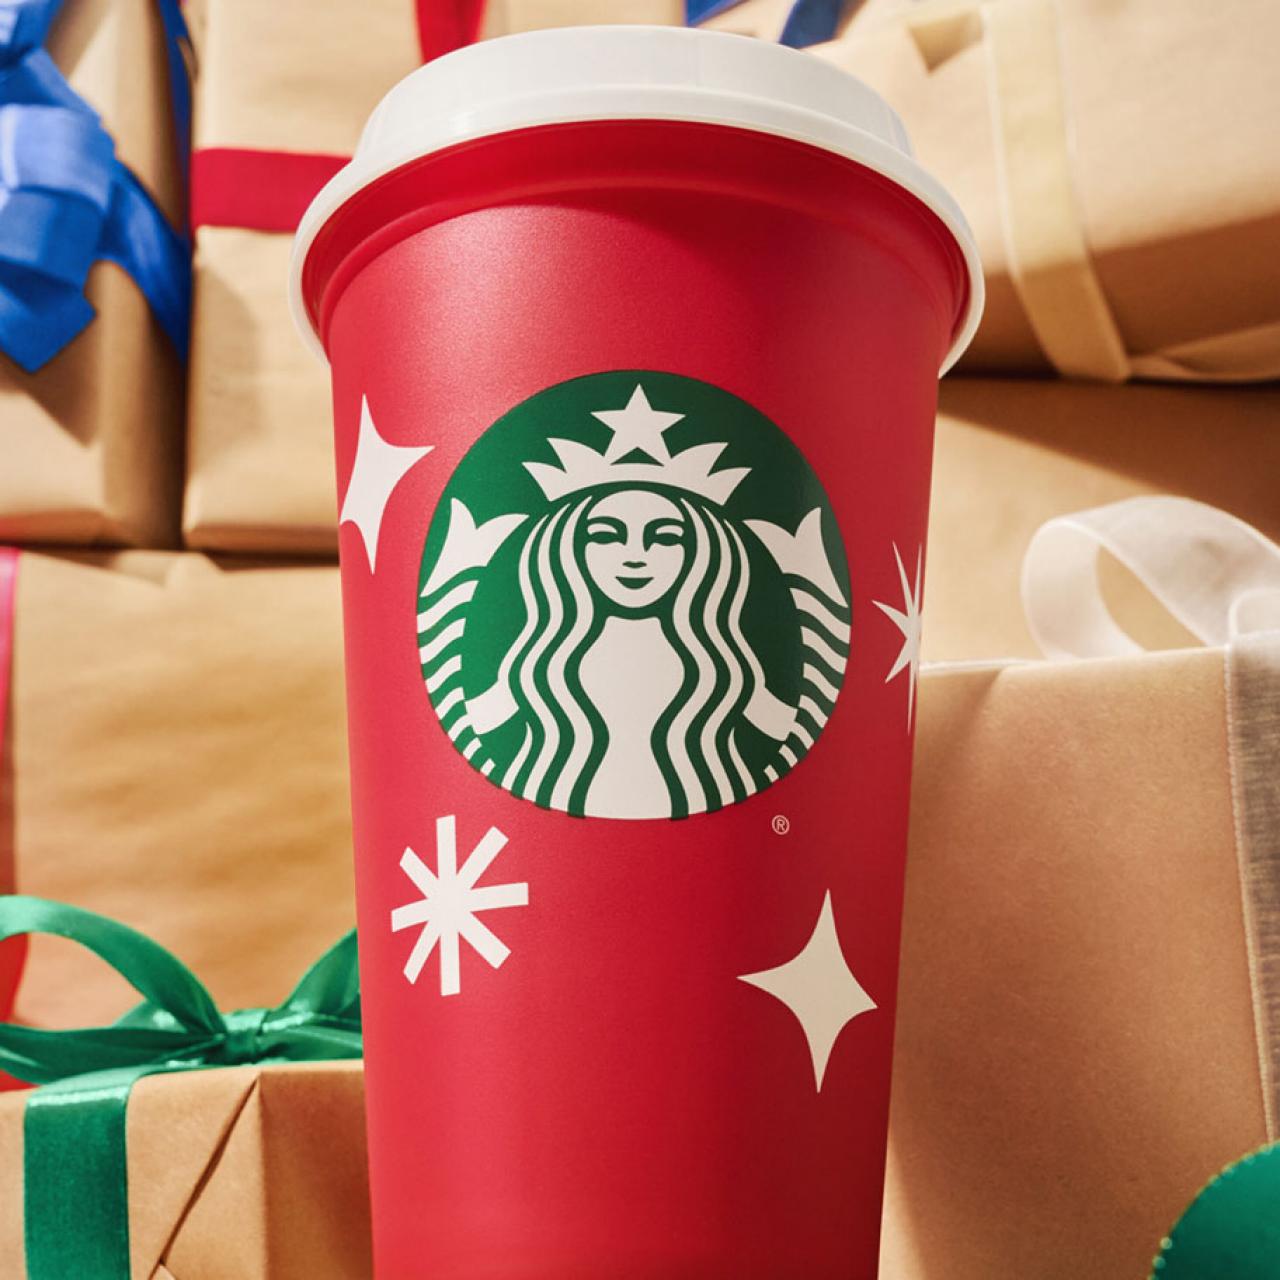 Get Your Free Reusable Red Cup at Starbucks on November 17, 2022